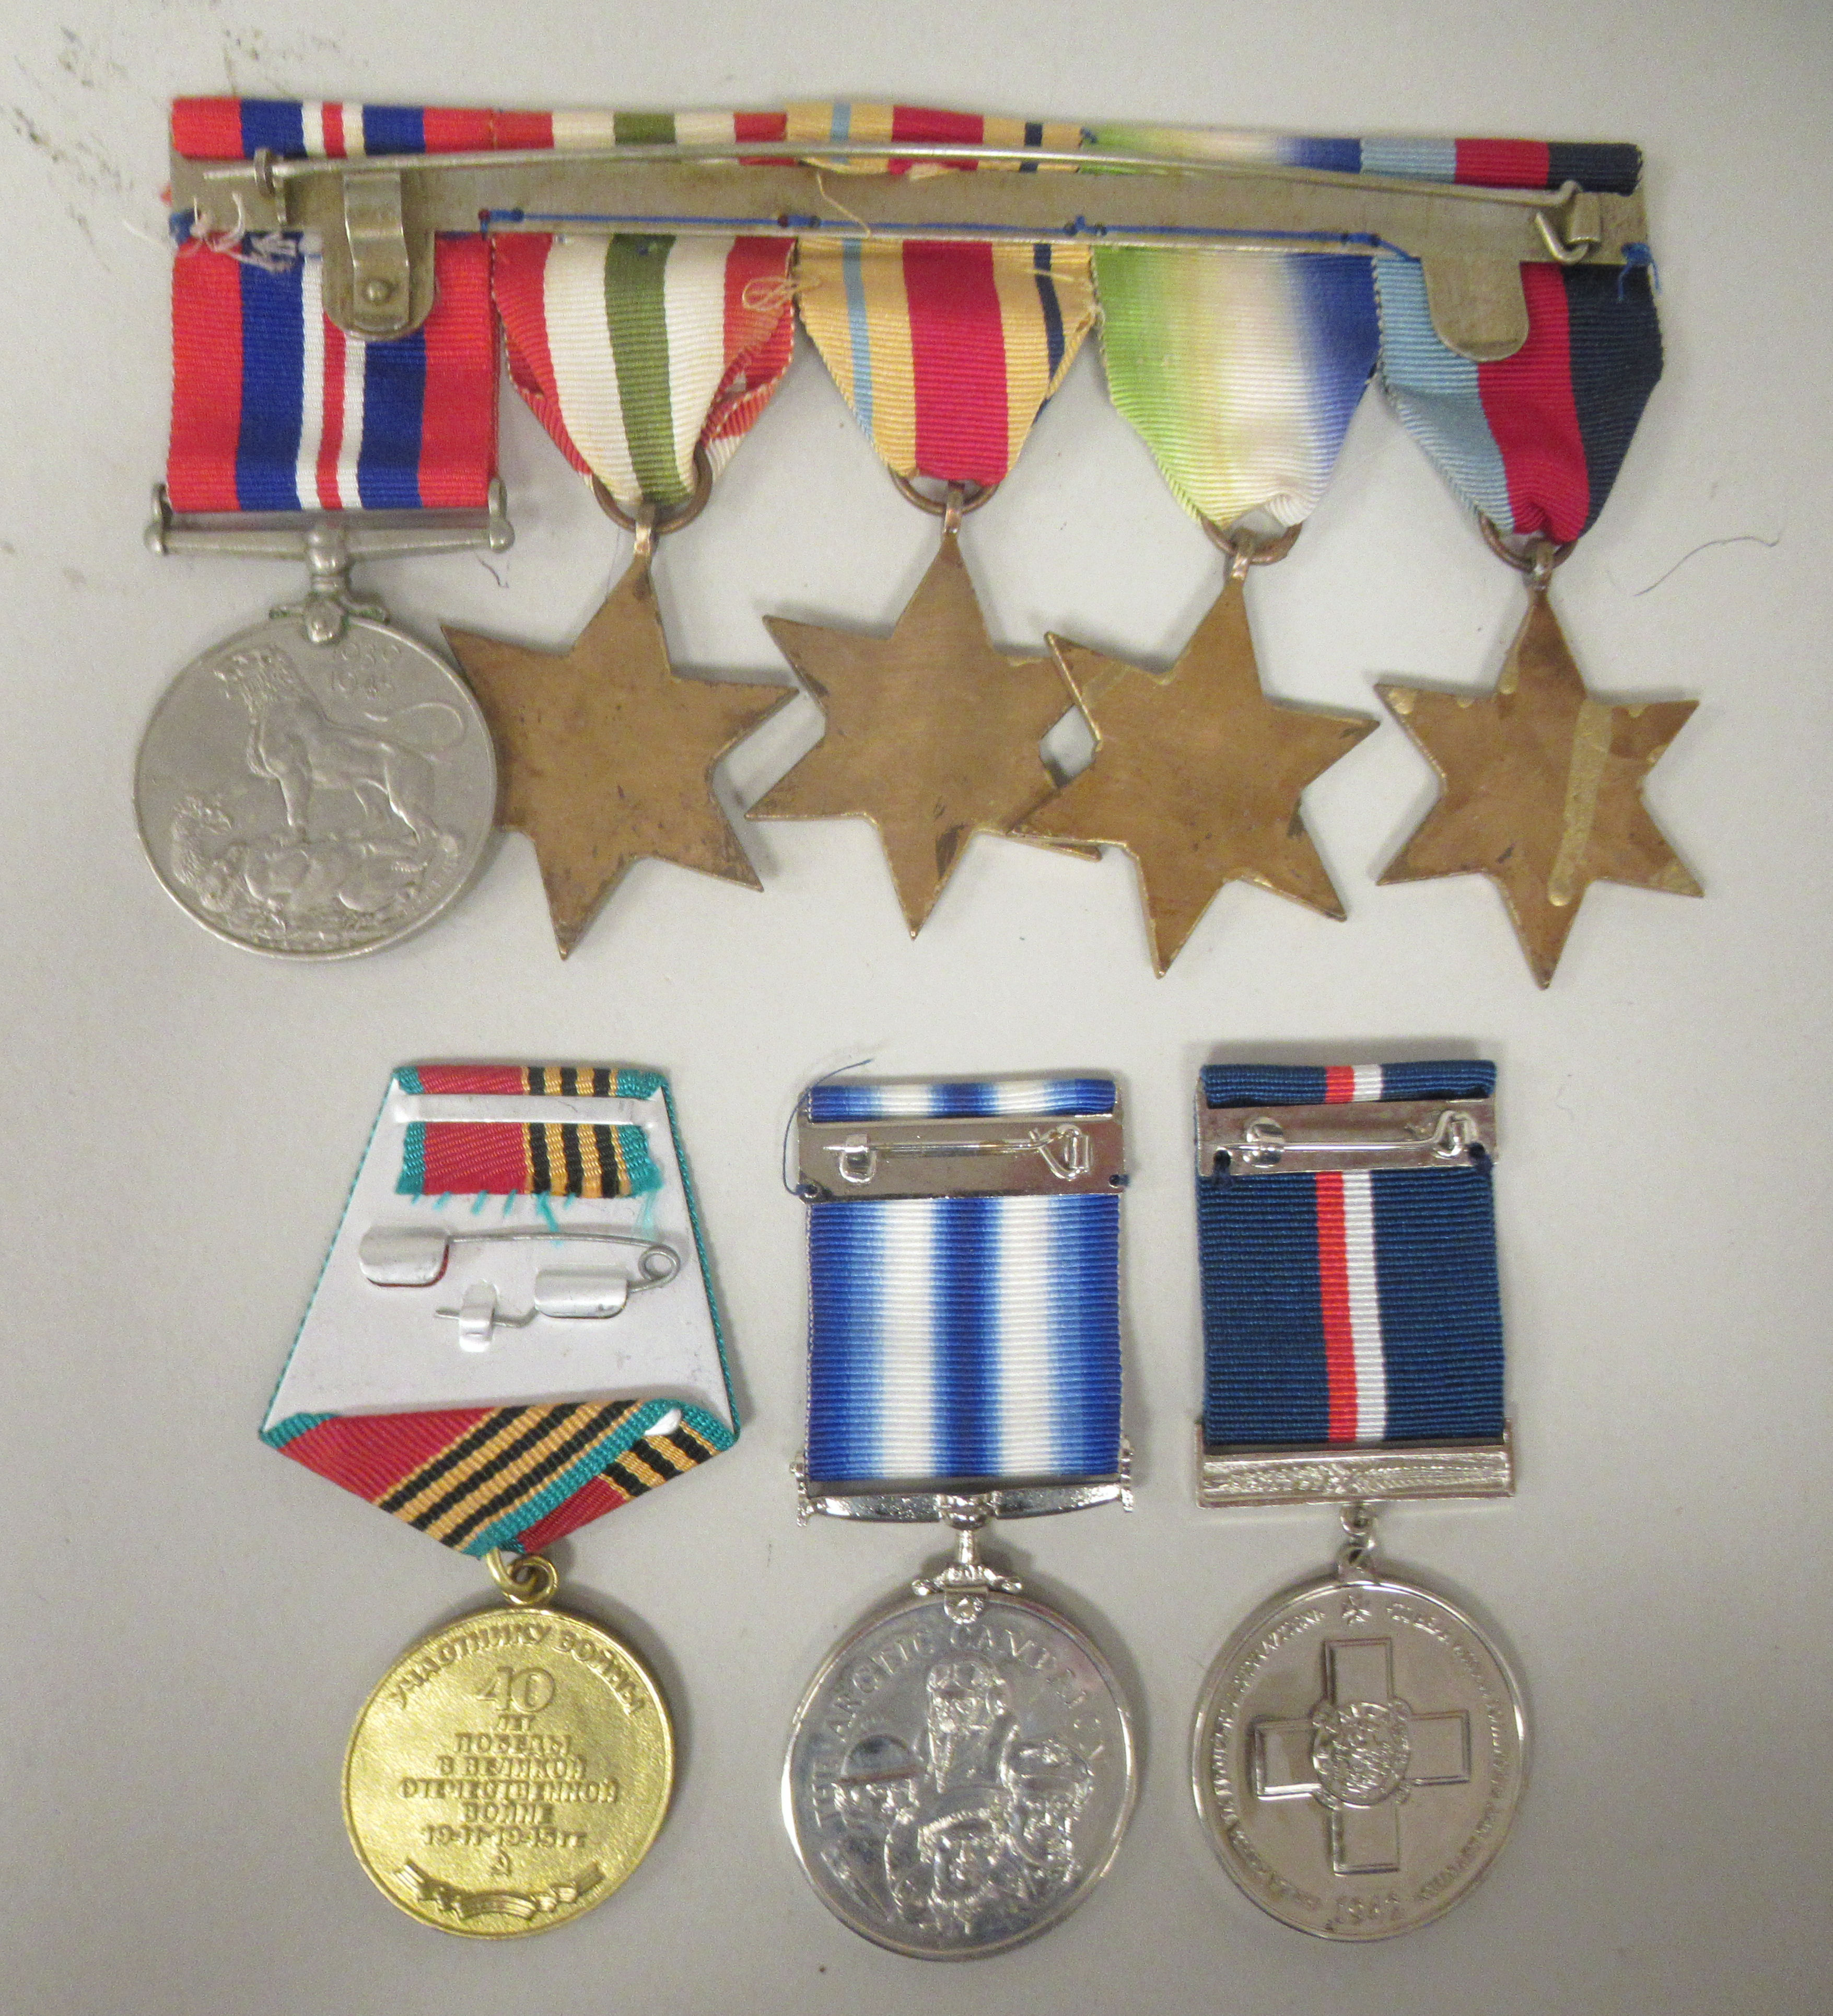 A 1939-1945 British War medal and ribbons; The 1939-1945 Star; The Atlantic Star; The Italy Star; - Image 2 of 2